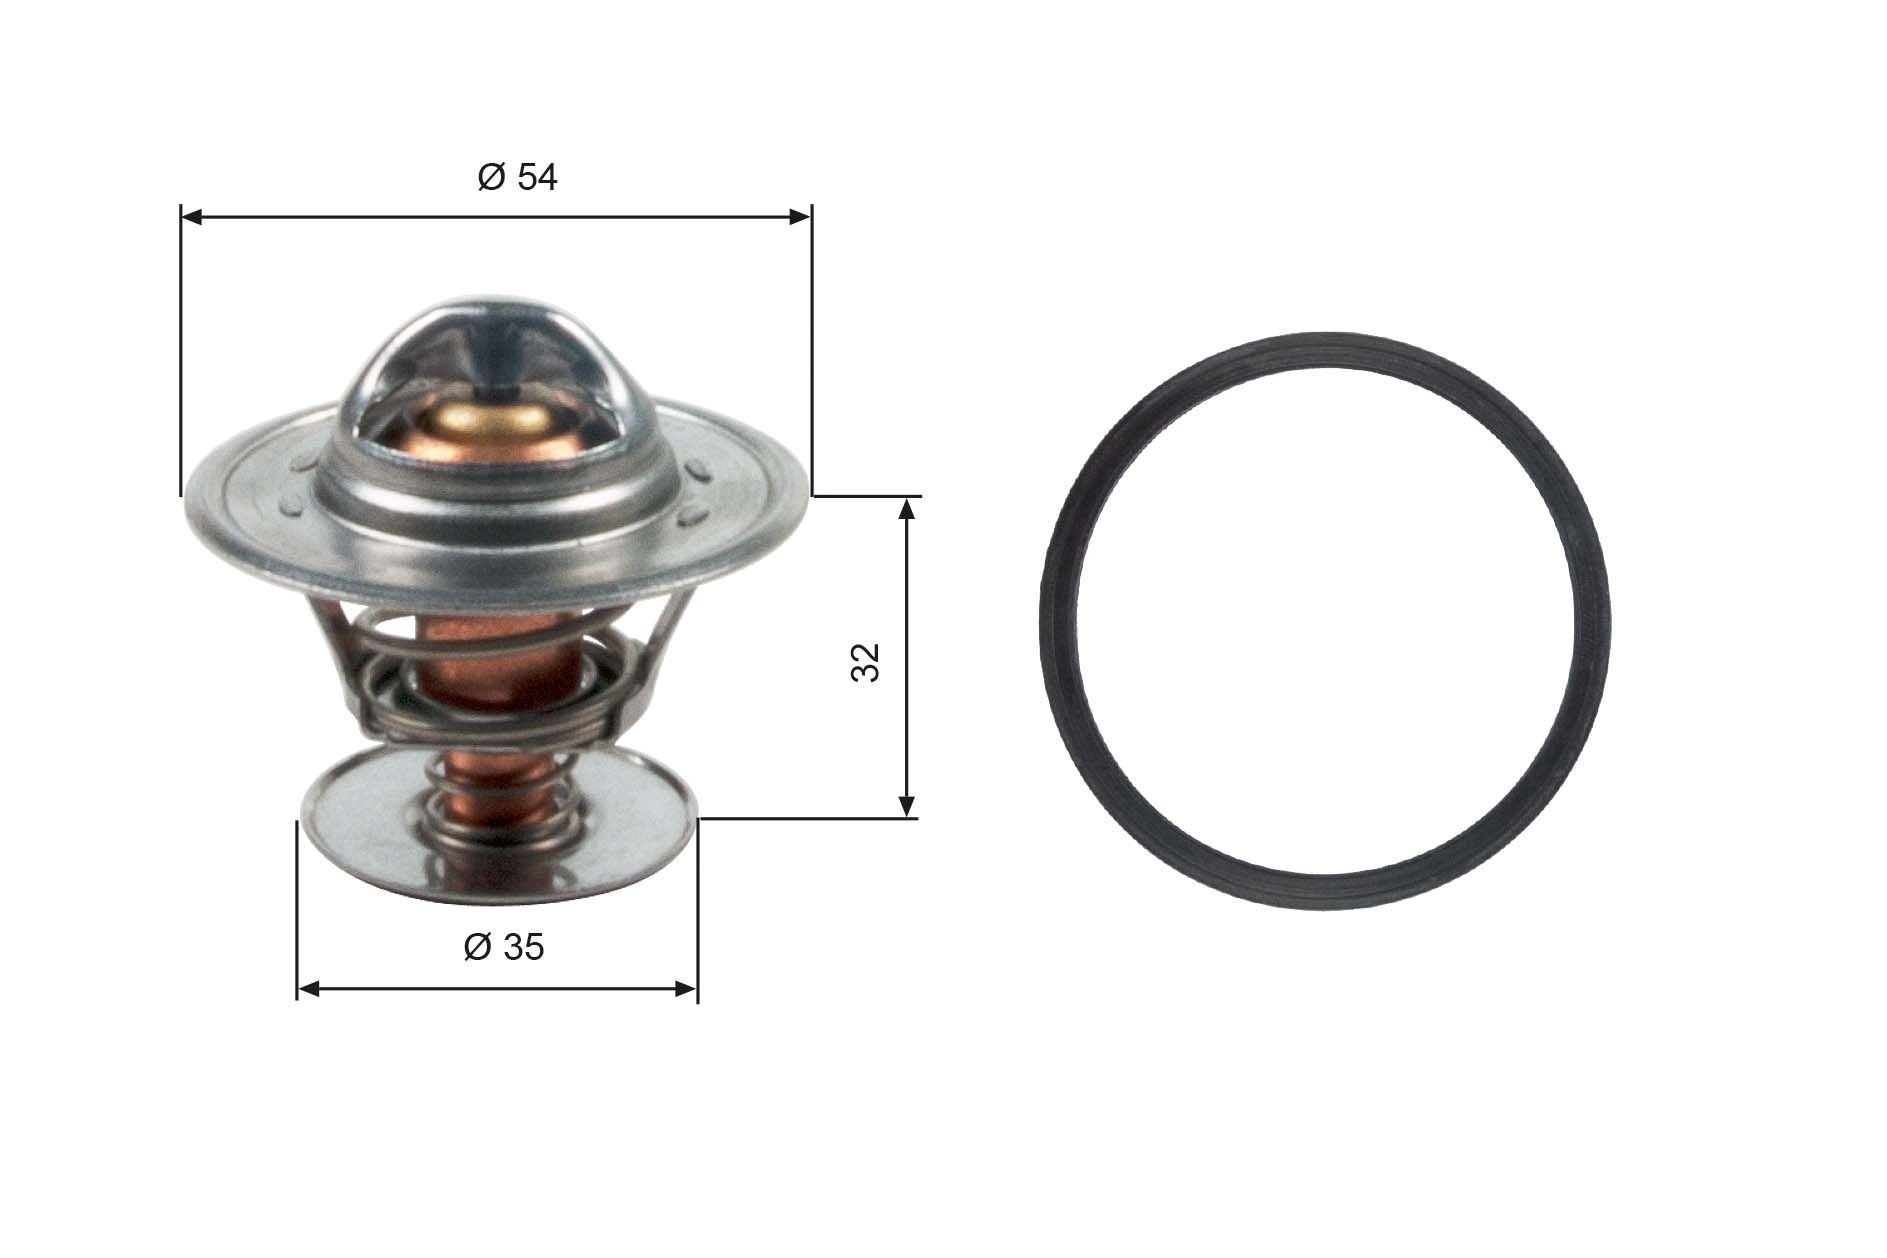 TH13684G1 Engine cooling thermostat TH13684G1 GATES Opening Temperature: 84°C, with gaskets/seals, without housing